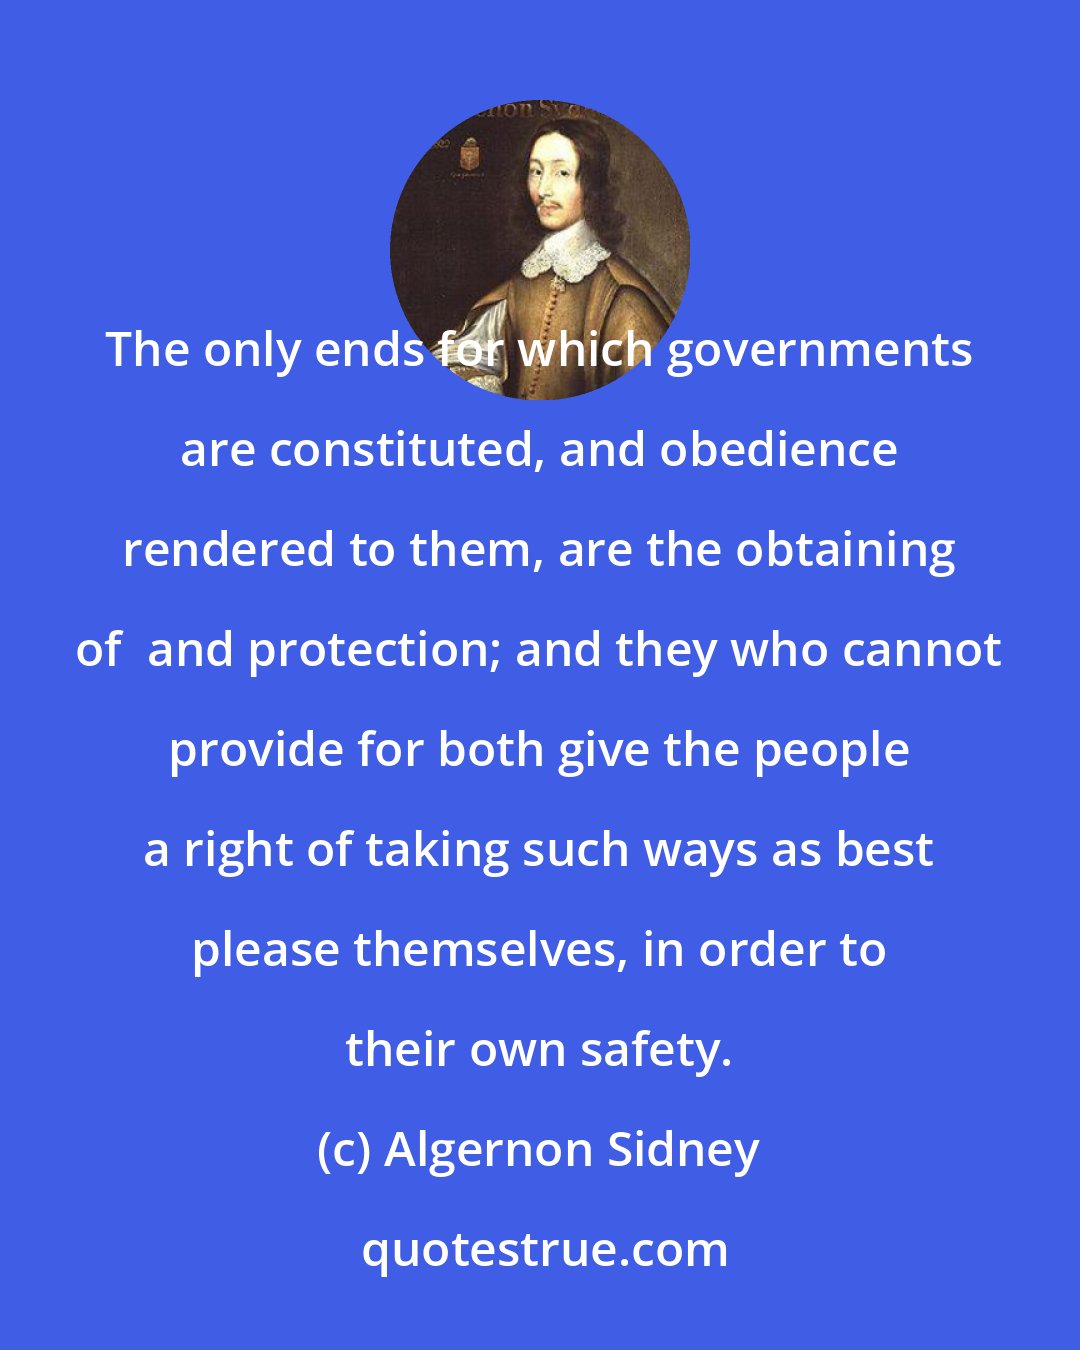 Algernon Sidney: The only ends for which governments are constituted, and obedience rendered to them, are the obtaining of  and protection; and they who cannot provide for both give the people a right of taking such ways as best please themselves, in order to their own safety.